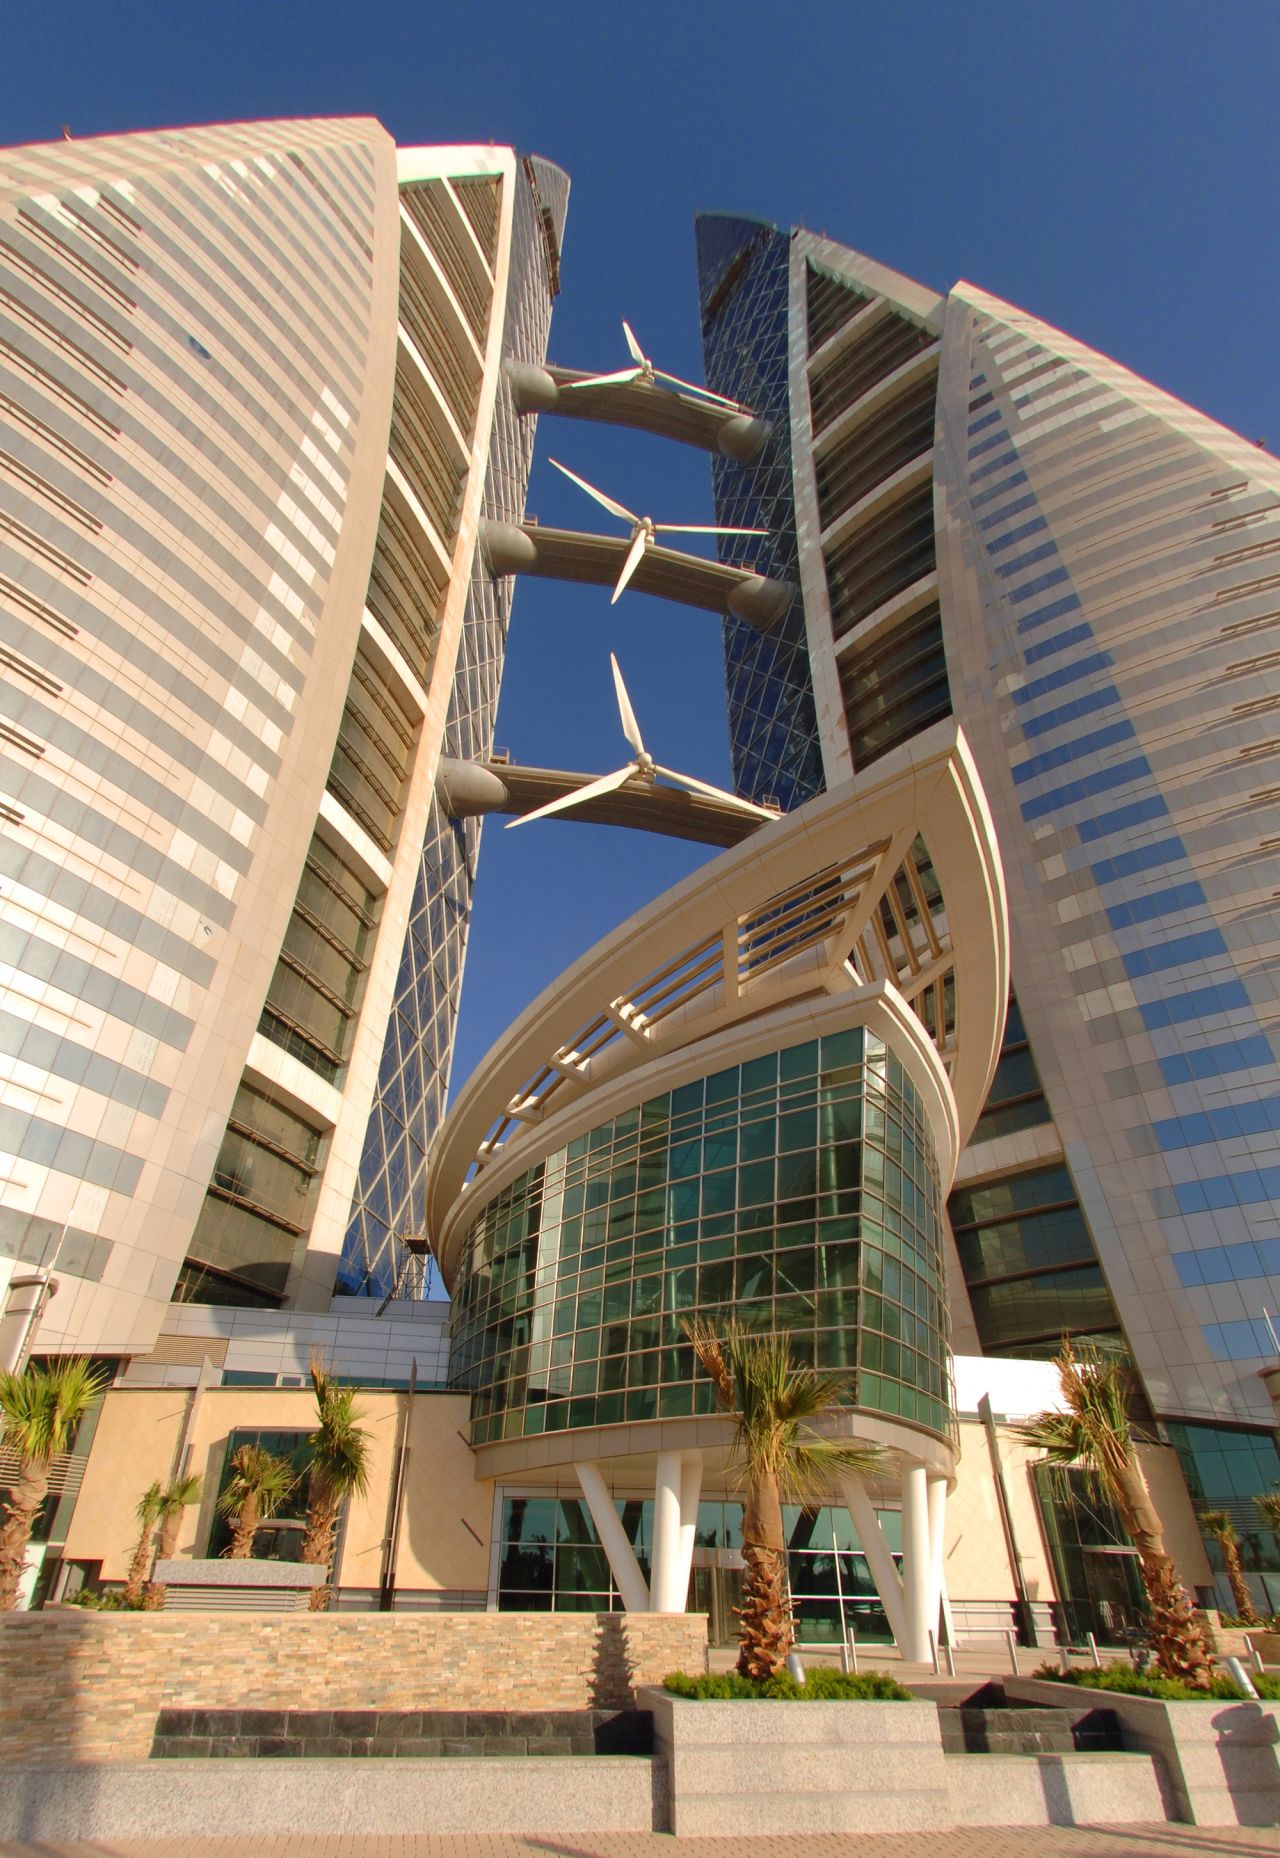 <a href="http://www.bahrainwtc.com/" target="_blank" target="_blank">The Bahrain World Trade Center</a>, built in 2008, is 50 floors high, and,  uniquely, giant wind tubines connect the building's two towers. The turbines generate for 11-15% of the power required by the building when fully operational, according to architect <a href="http://www.atkinsglobal.com/" target="_blank" target="_blank">Atkins</a>.